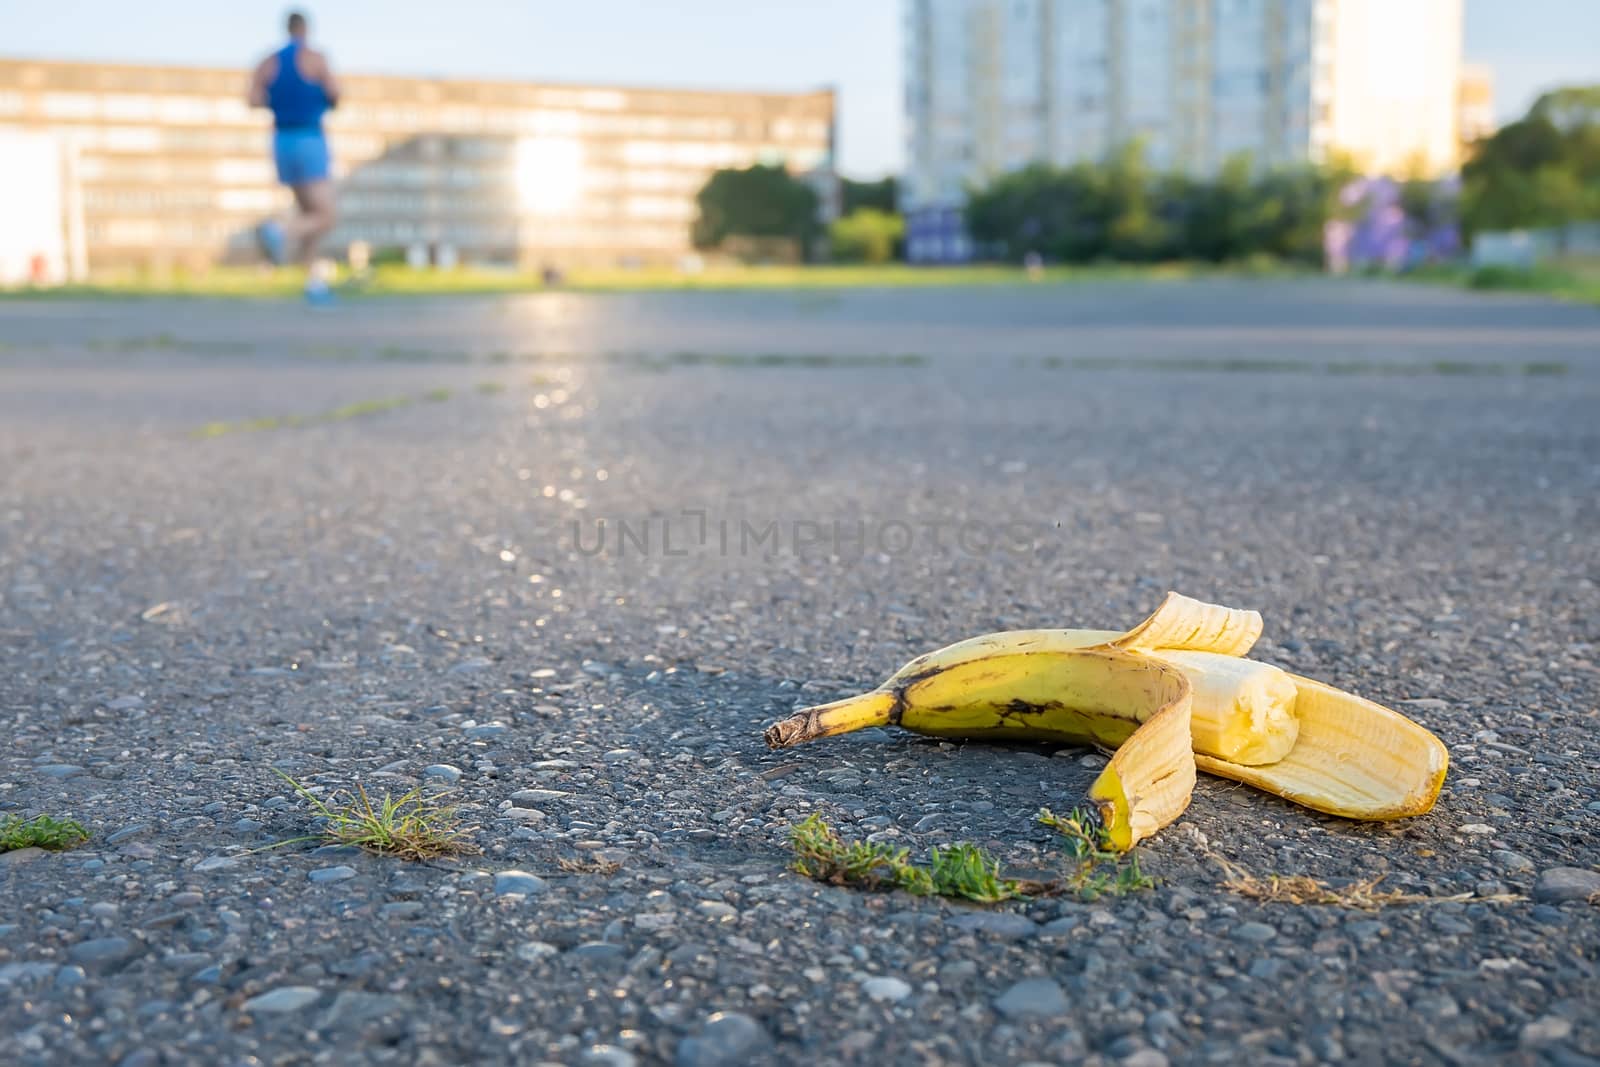 a discarded bitten banana is lying on the running track of the stadium, where athletes run past